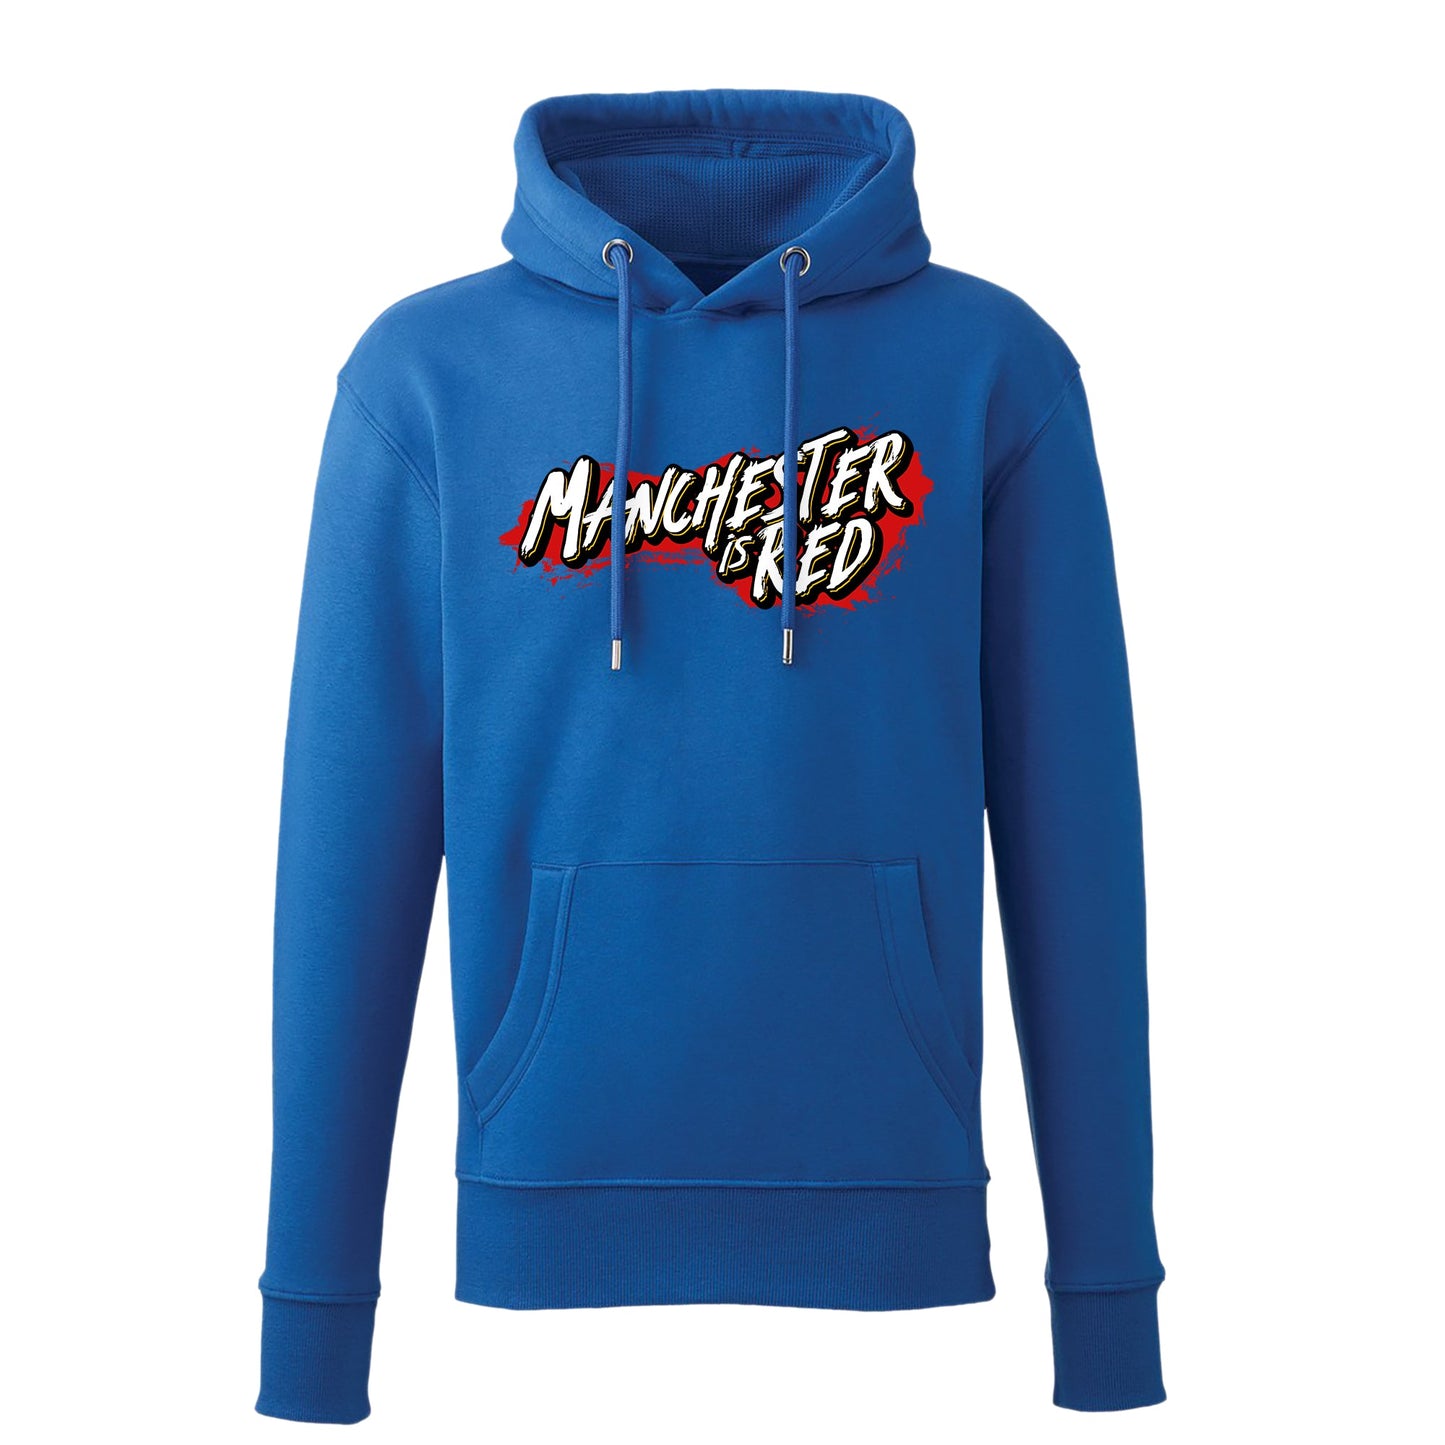 Manchester is Red Hoodie